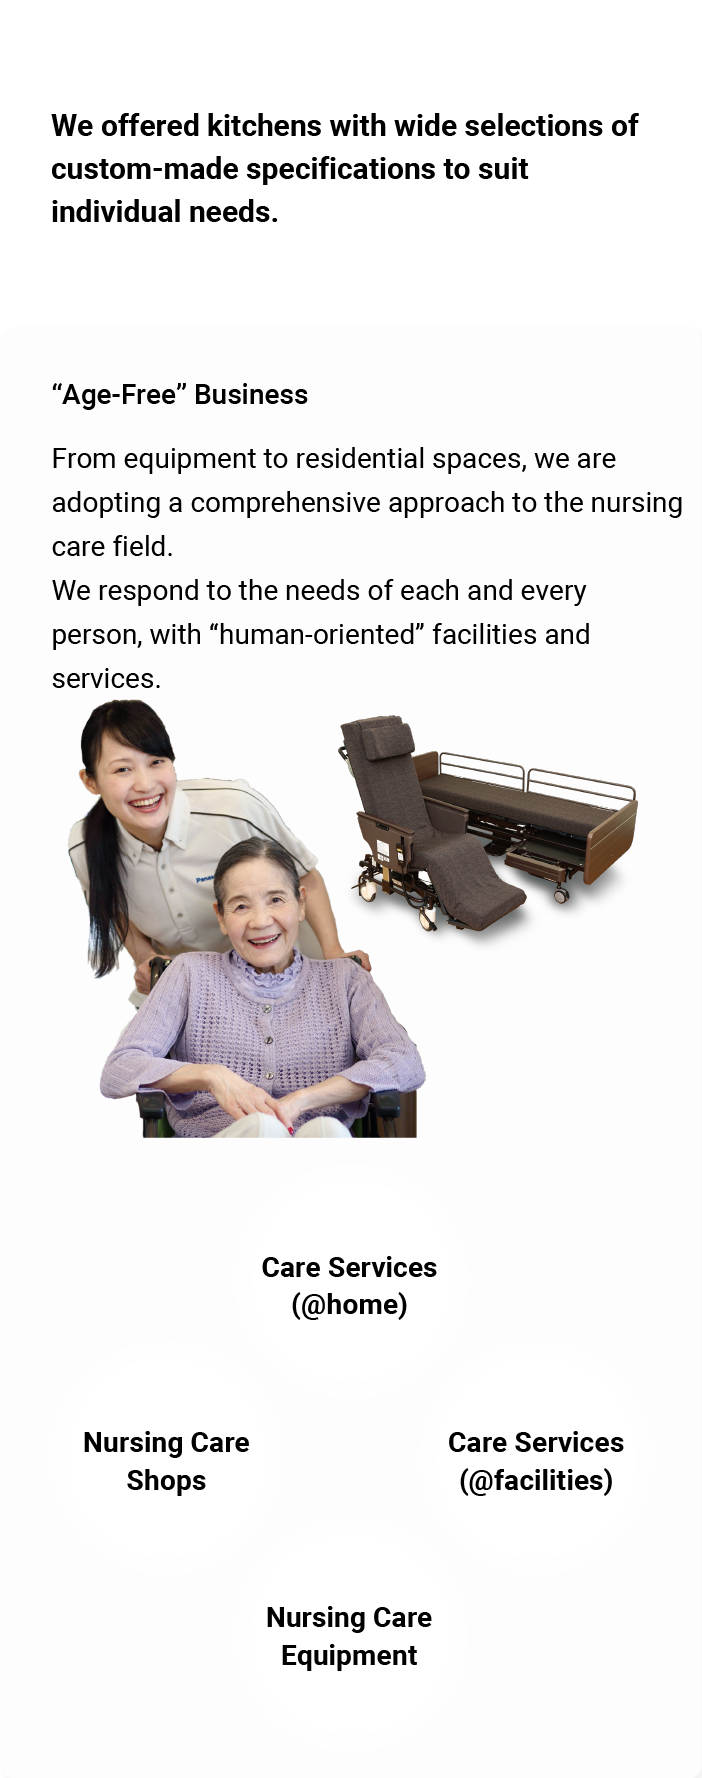 We offered kitchens with wide selections of custom-made specifications to suit individual needs. "Age-Free" Business. From equipment to residential spaces, we are adopting a comprehensive approach to the nursing care field. We respond to the needs of each and every person, with “human-oriented” facilities and services.